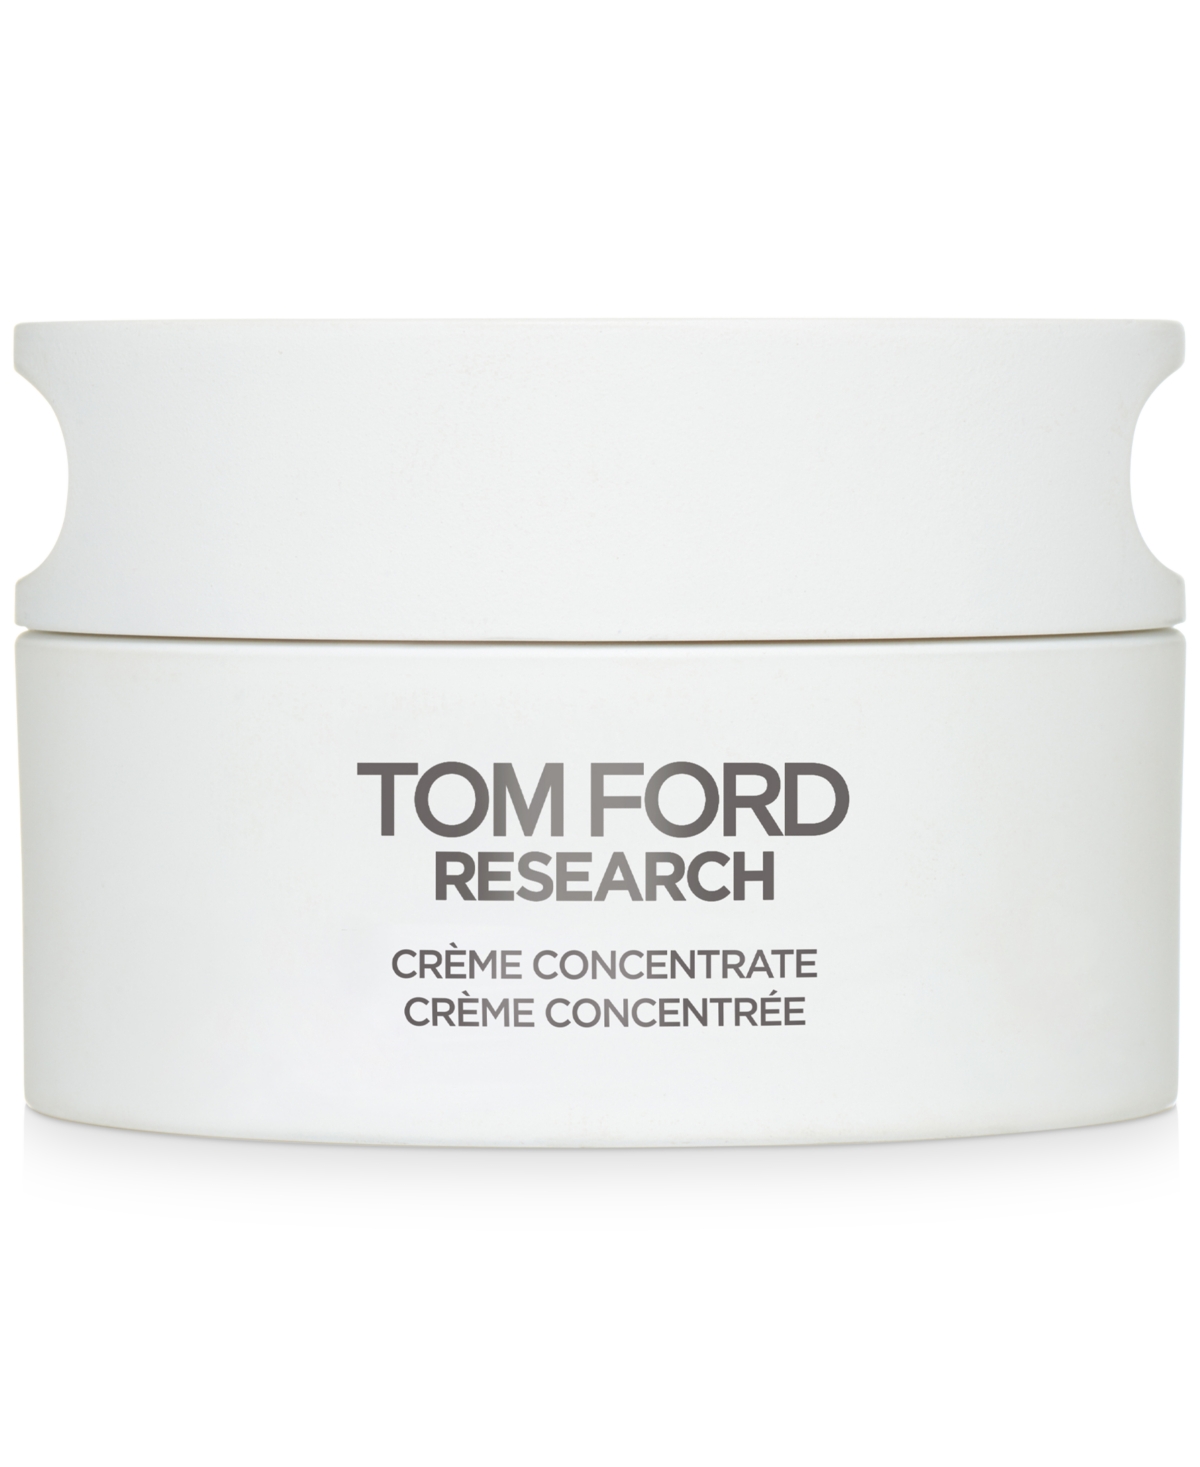 Tom Ford Research Crème Concentrate & Reviews - Skin Care - Beauty - Macy's